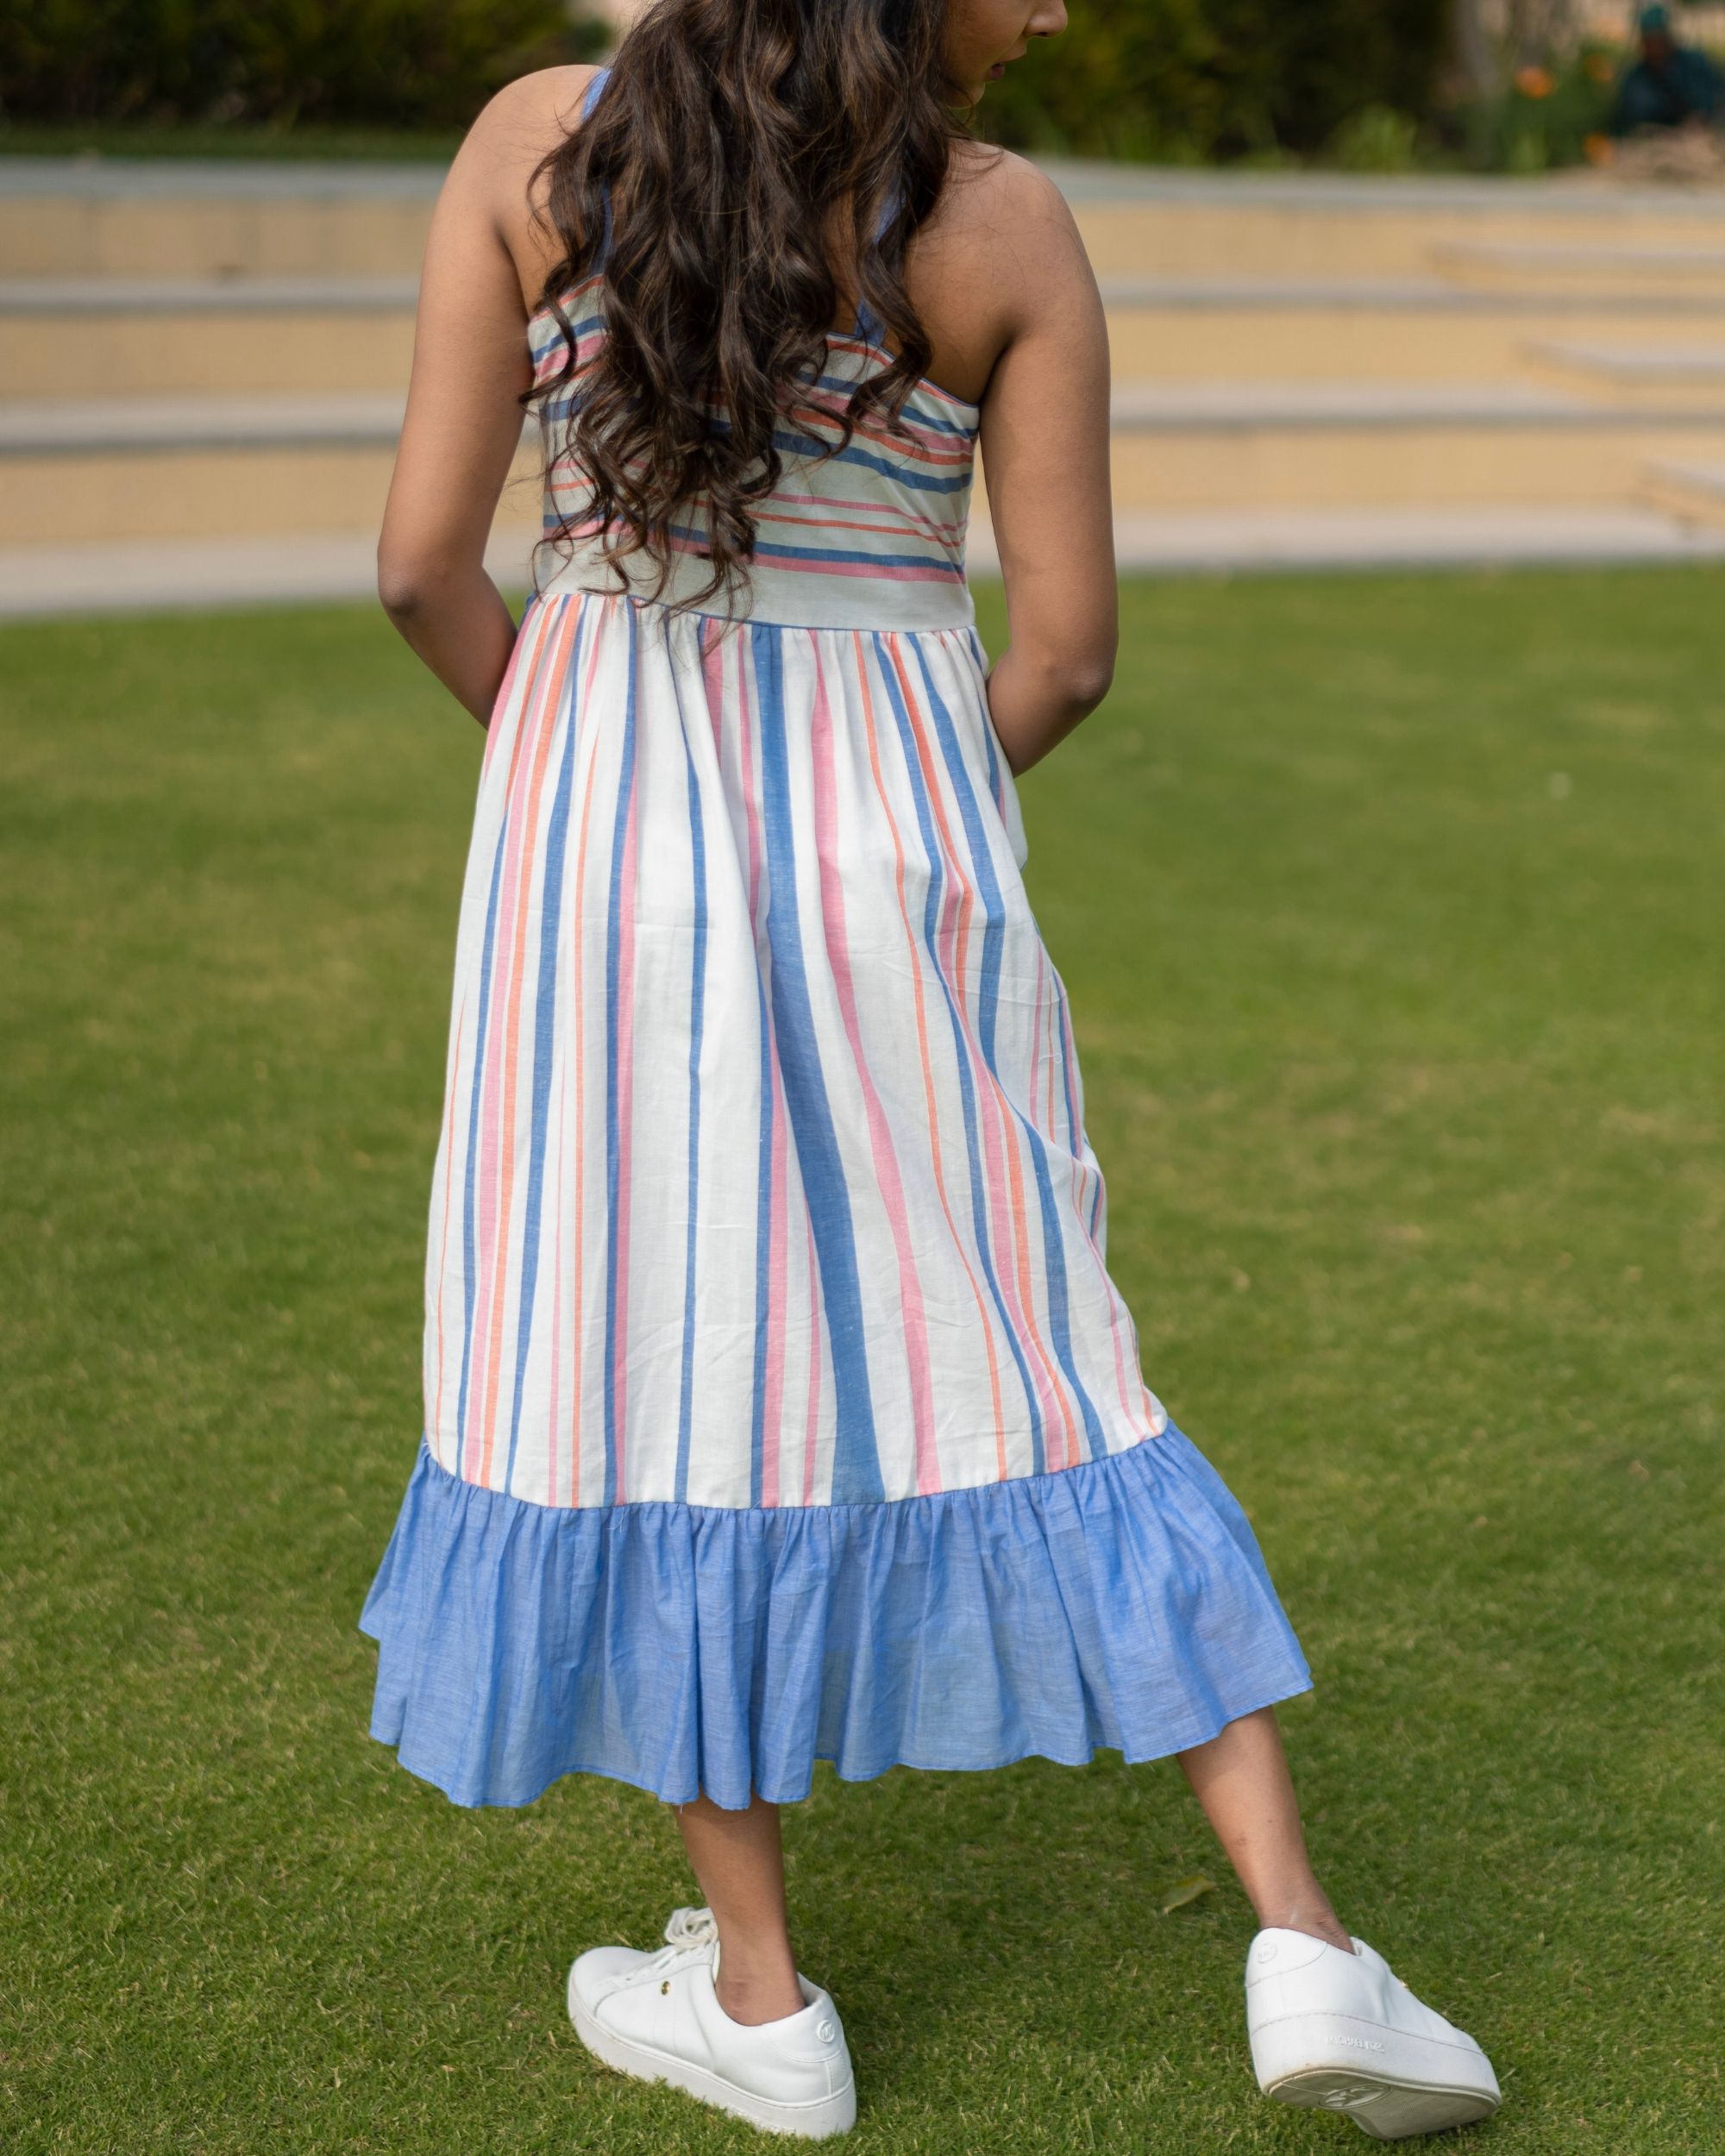 Ruffled pink and blue striped dress by The Patakha Closet | The Secret ...